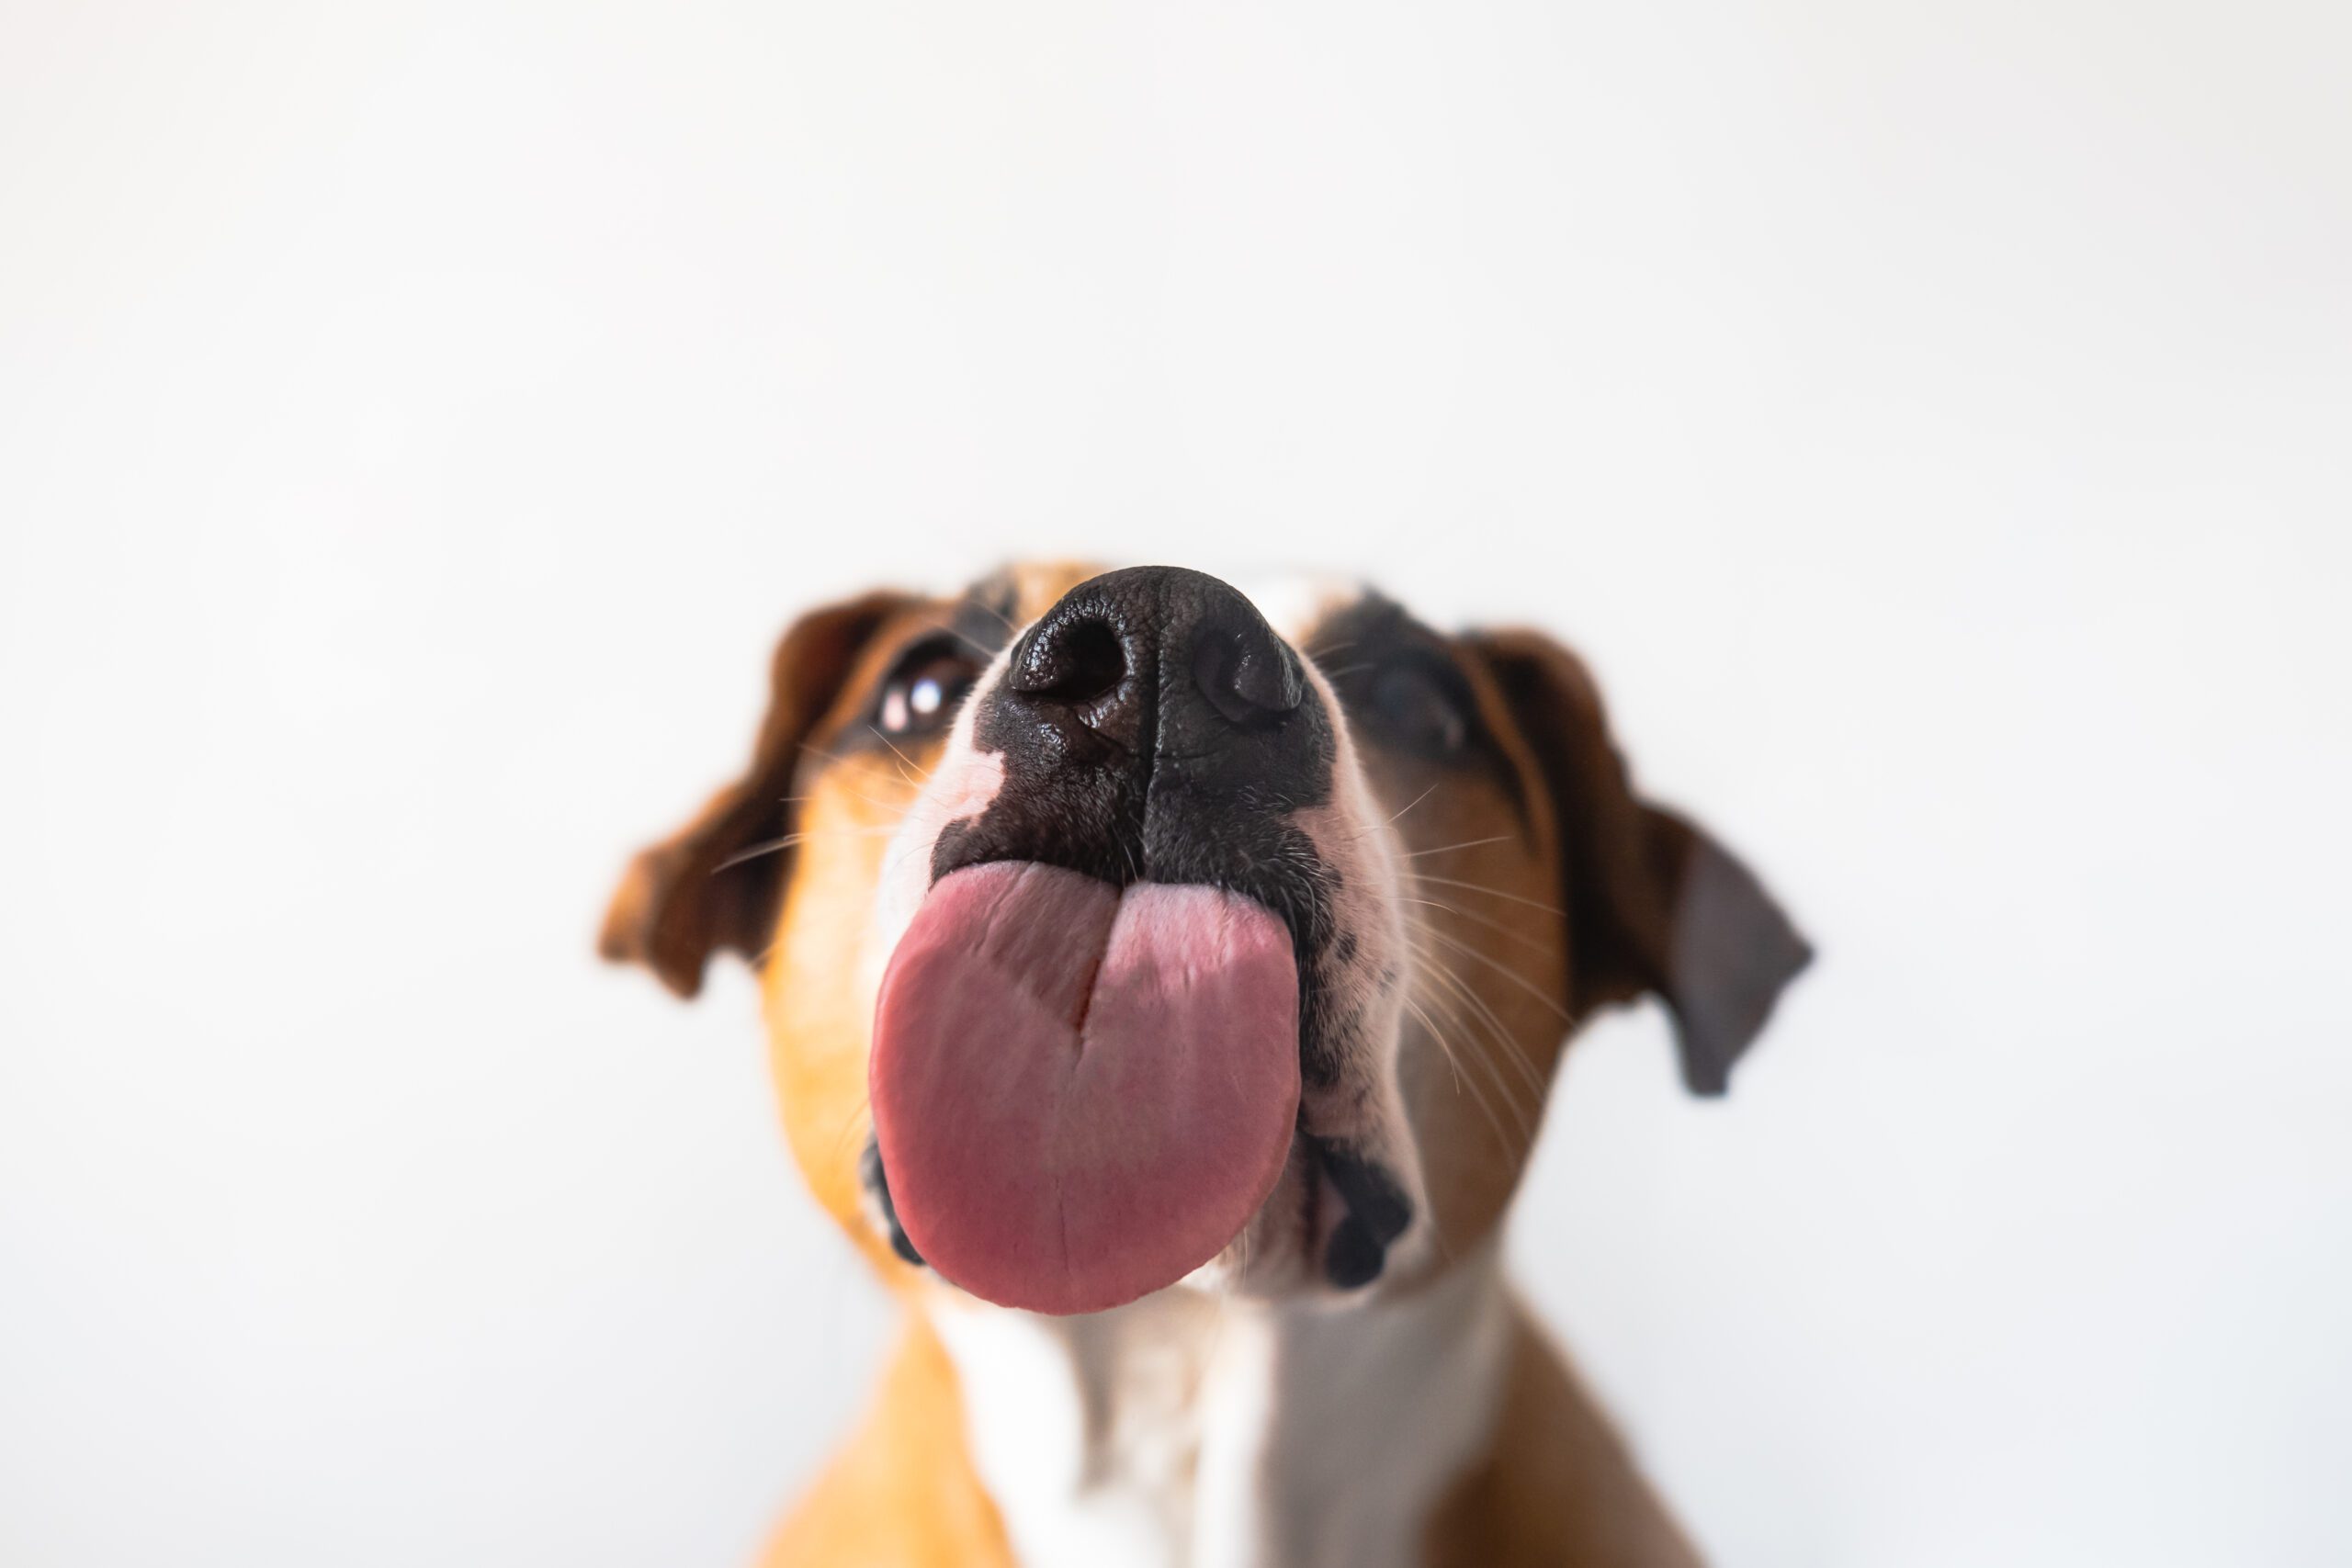 Dog with licking tongue, close-up view, shot through the glass.